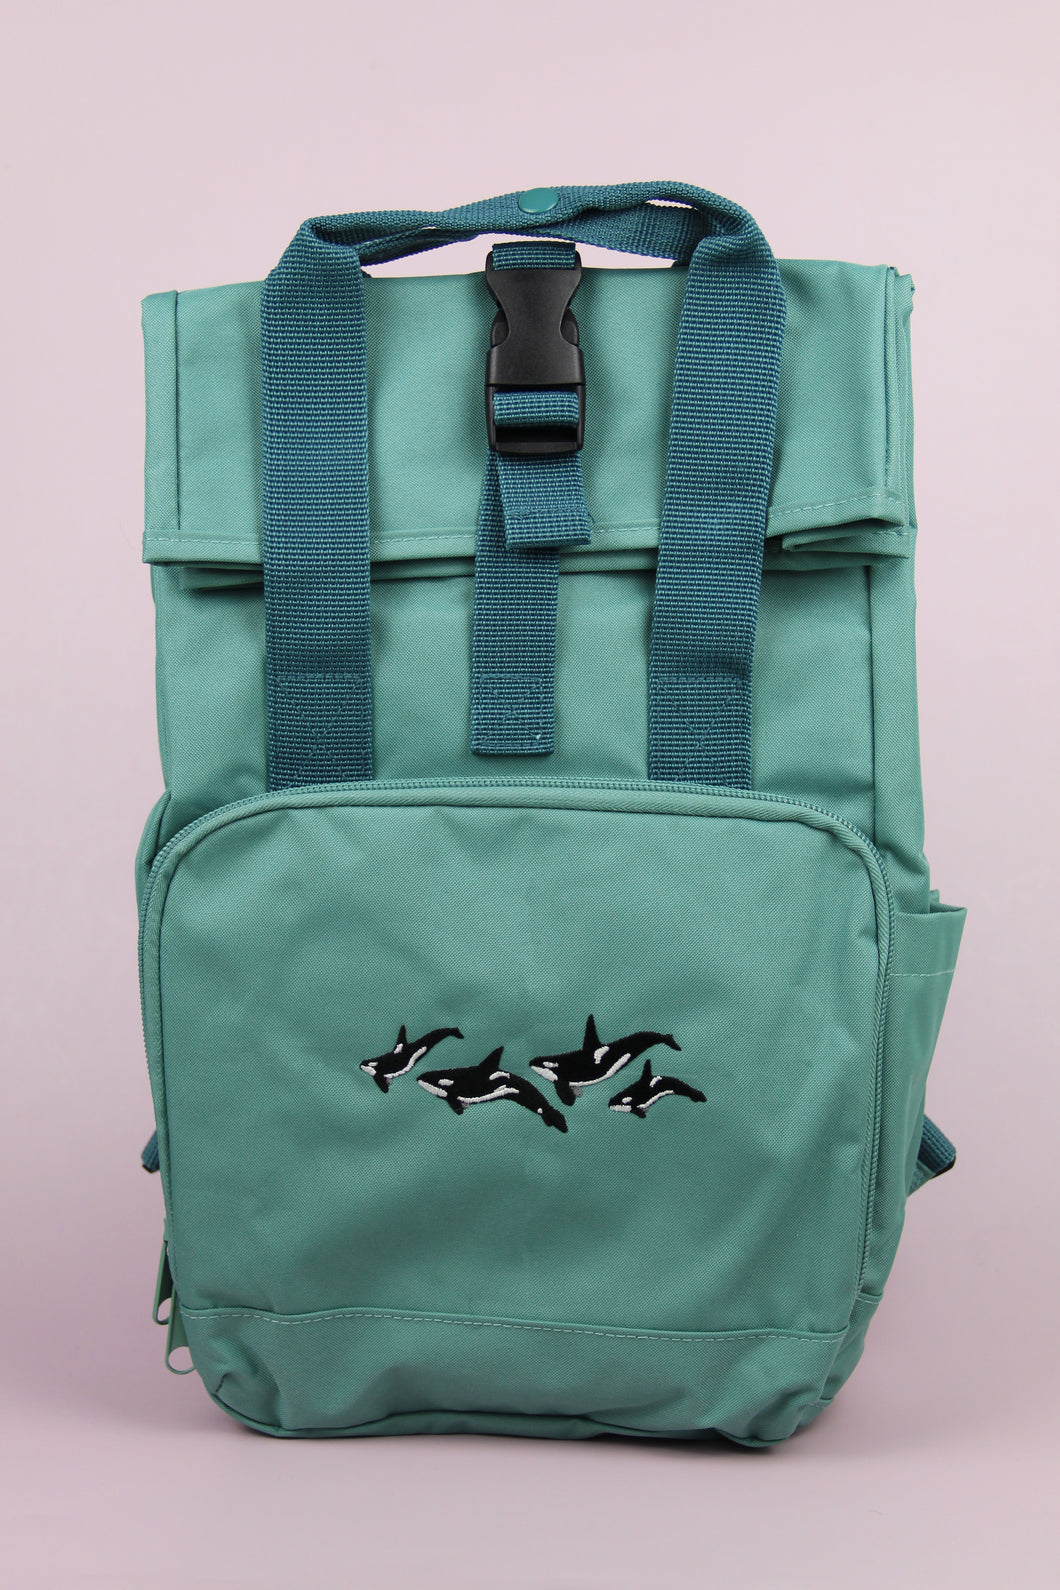 Orca Pod Recycled Backpack - Sage